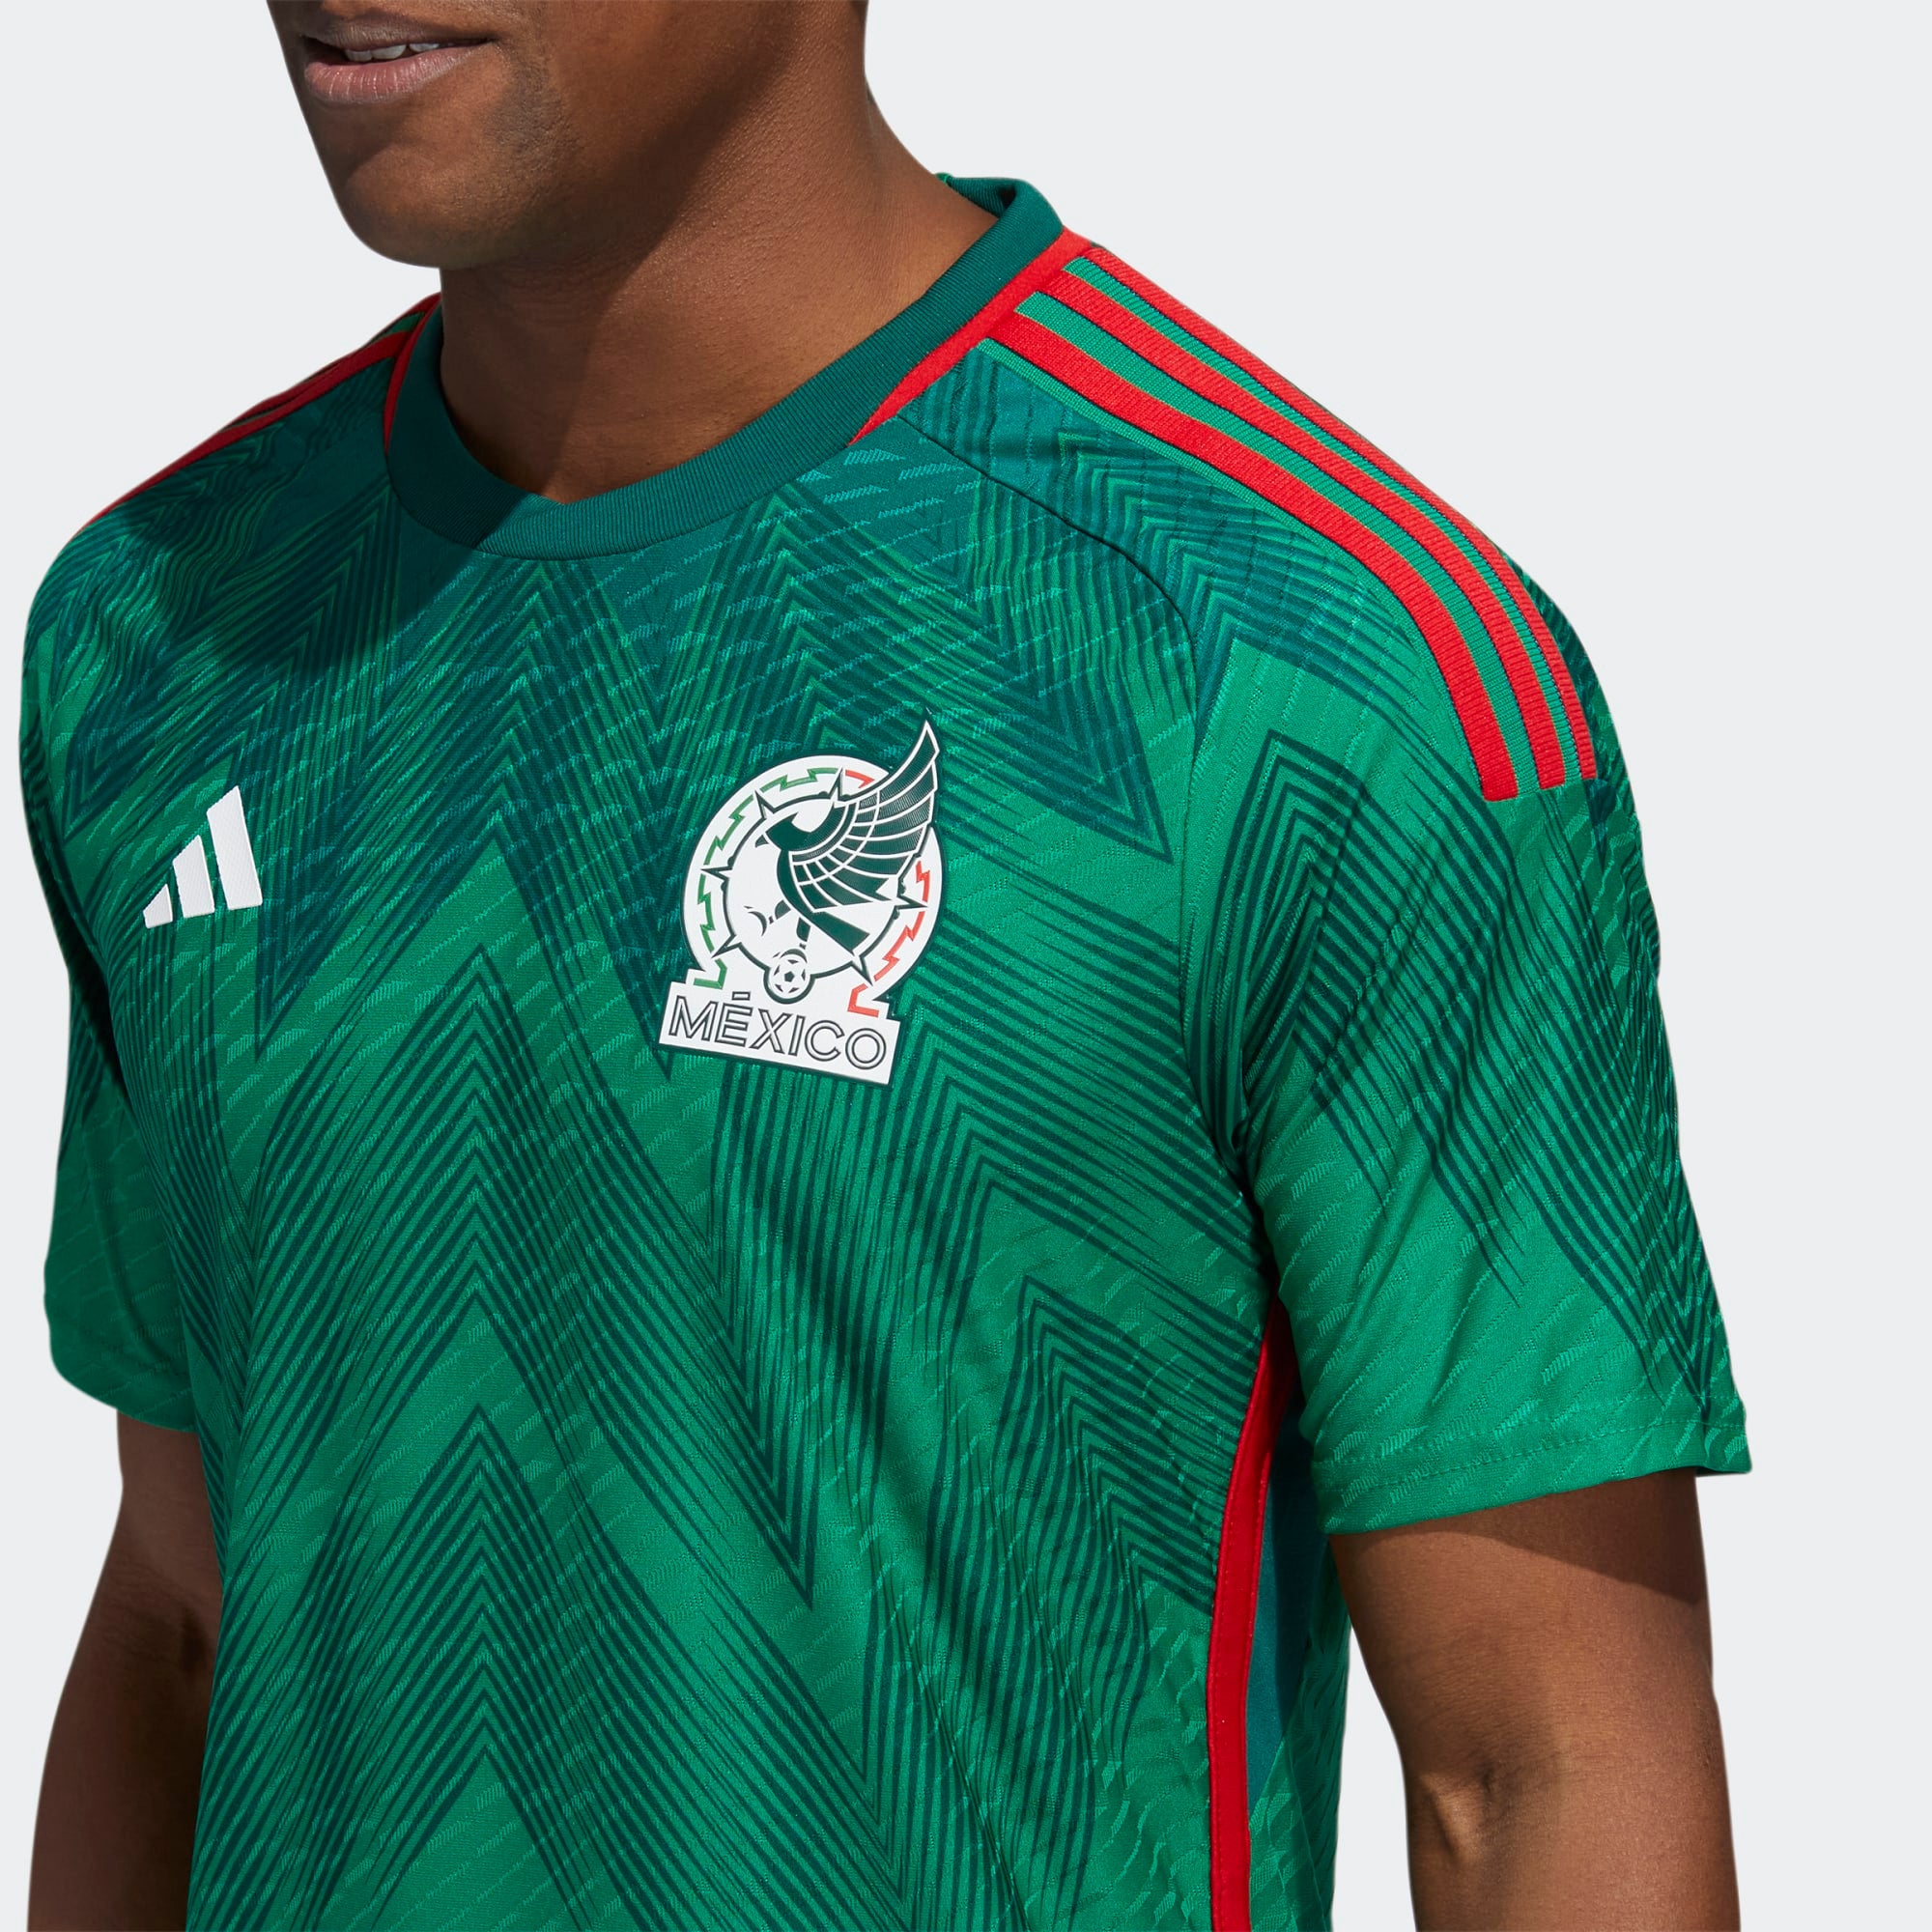 Mexico Football Jersey 2024 World Cup Catie Melamie